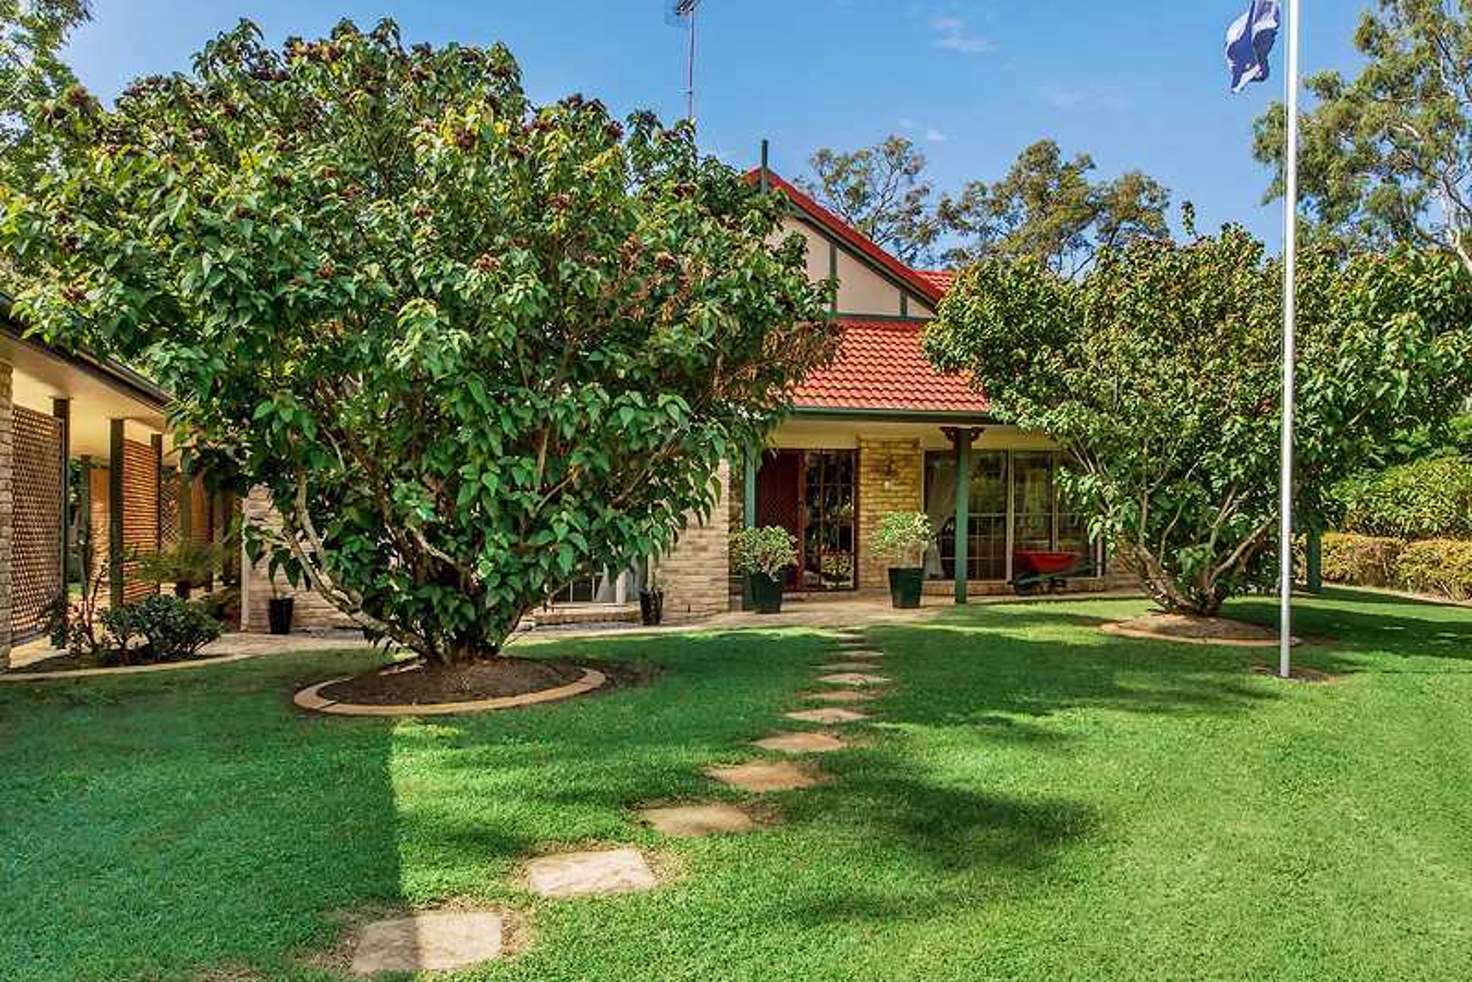 Main view of Homely house listing, 3 Clansman Court, Bonogin QLD 4213